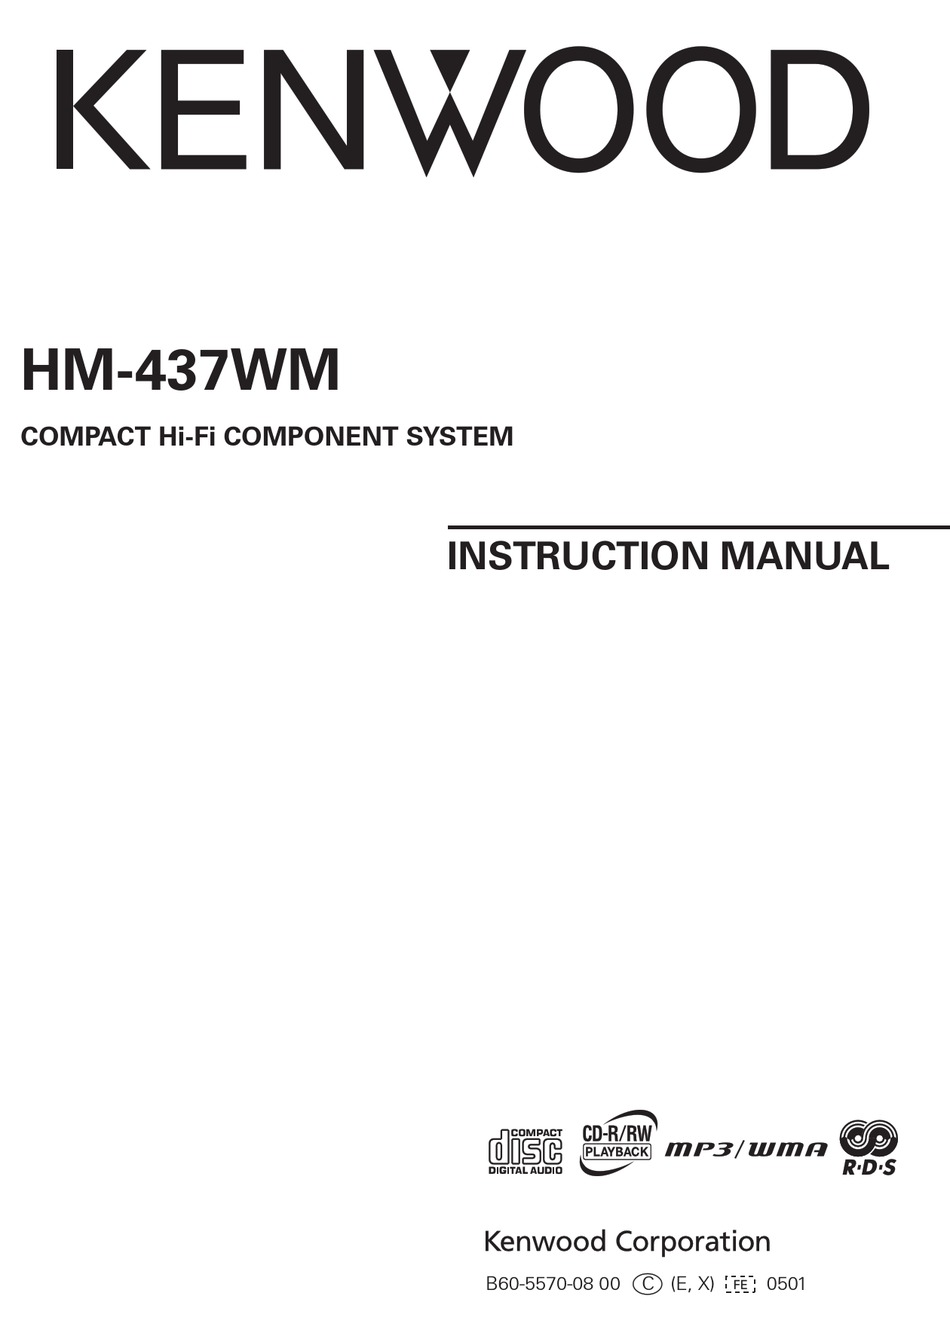 Micro Systems • HM-437WM-S Specifications • KENWOOD Europe